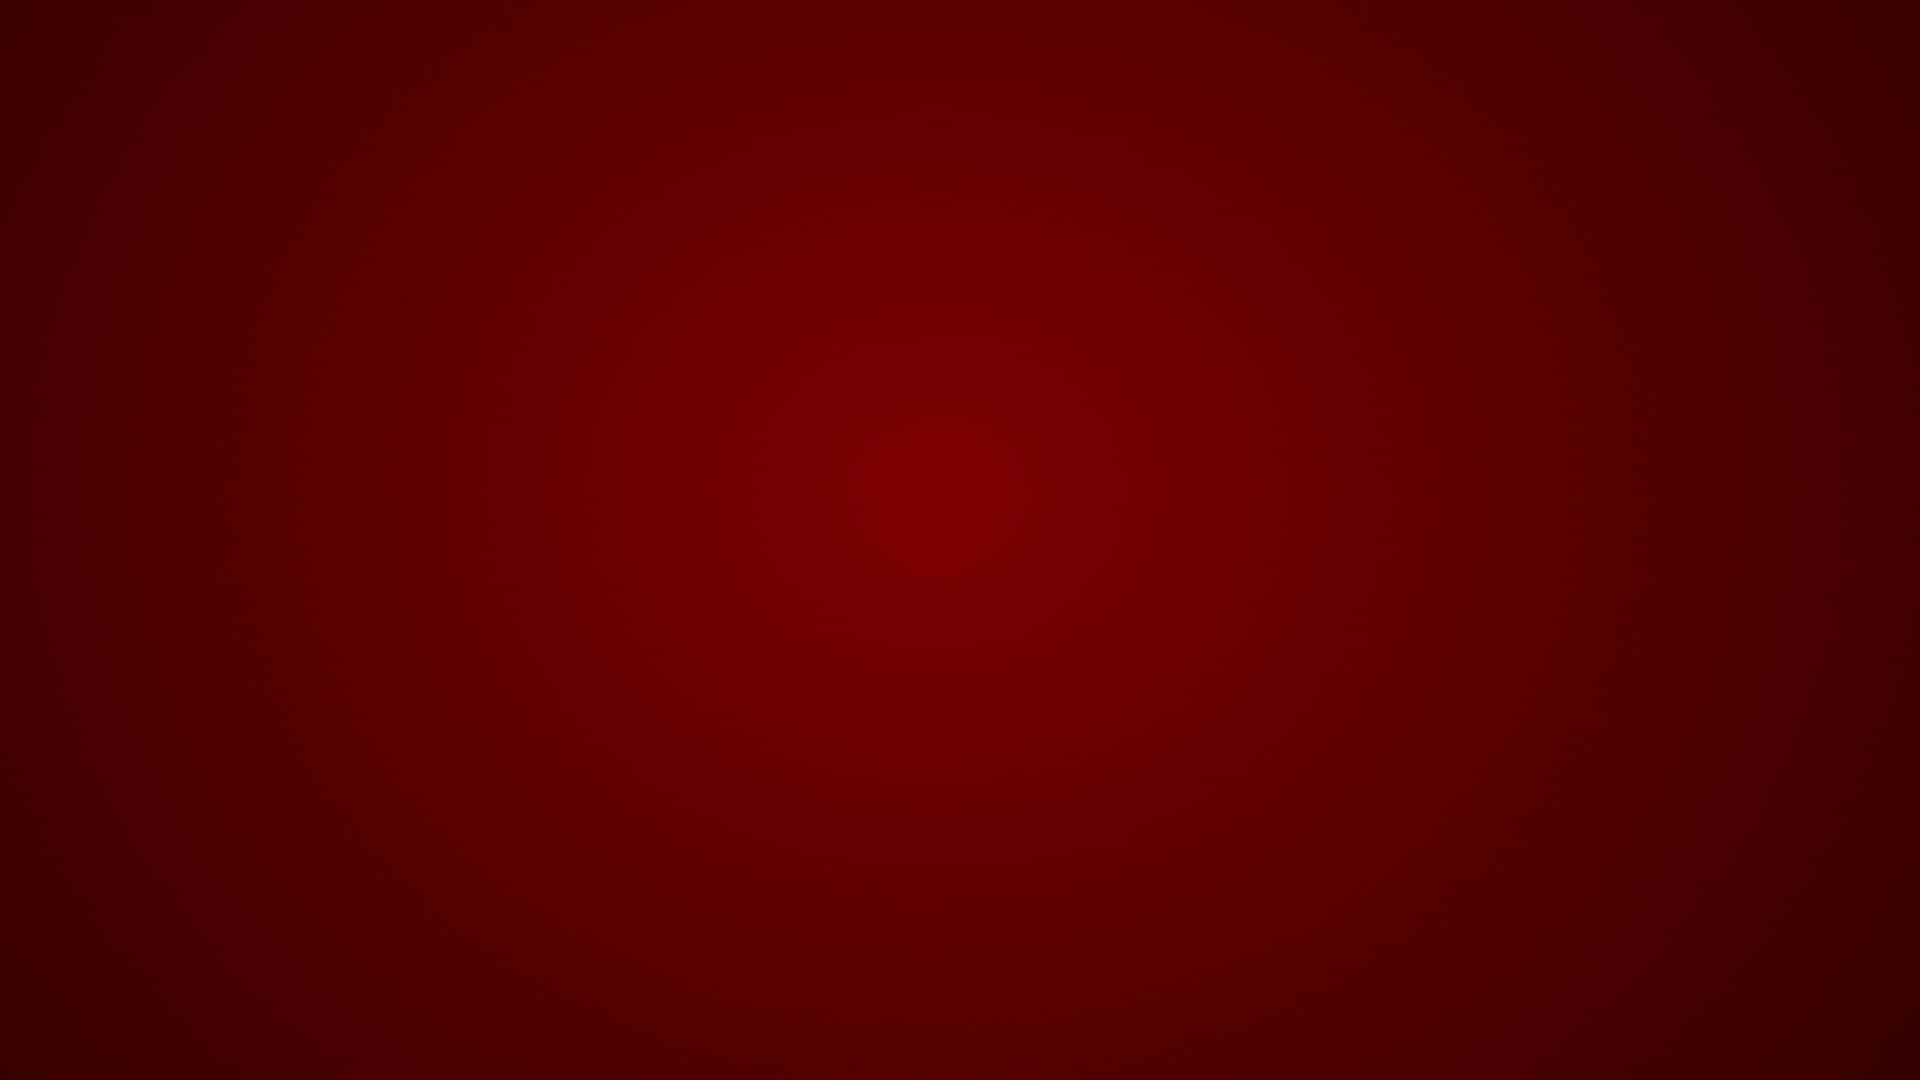 Free Maroon Background Photos, [100+] Maroon Background for FREE |  